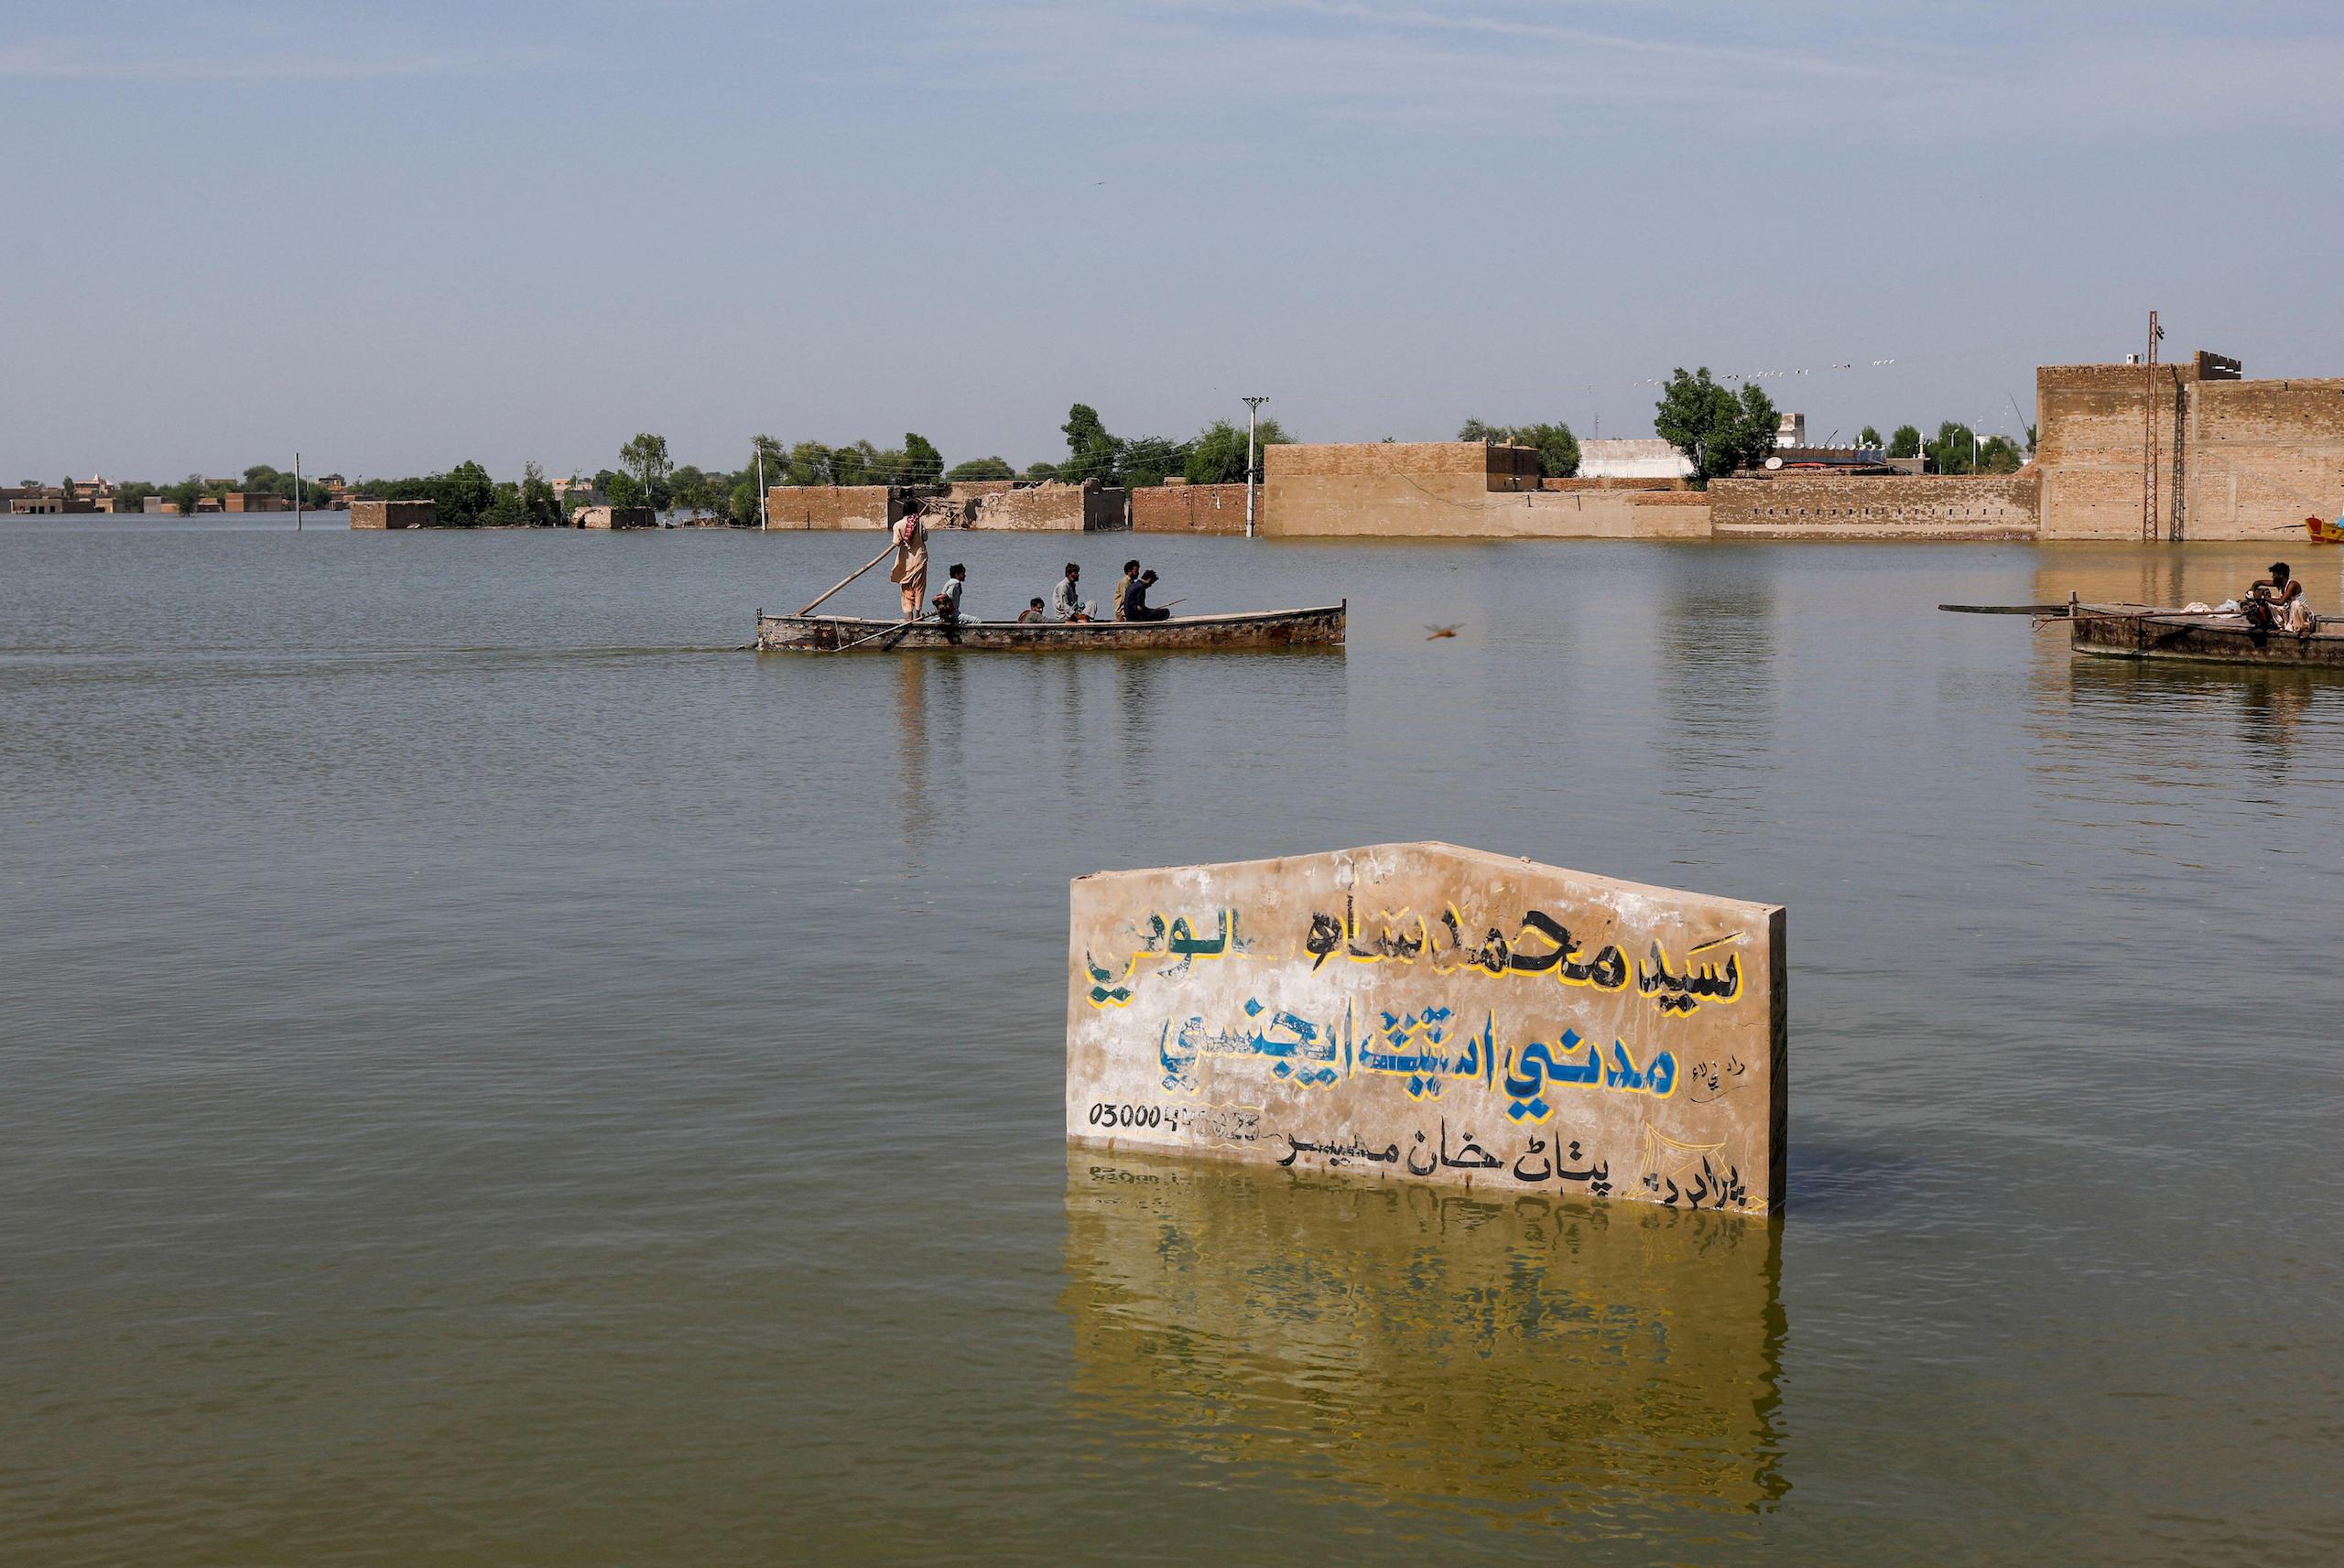 <p>Houses submerged by flood waters following extreme monsoon rainfall in Mehar, Pakistan, this August (Image: Akhtar Soomro / Alamy)</p>